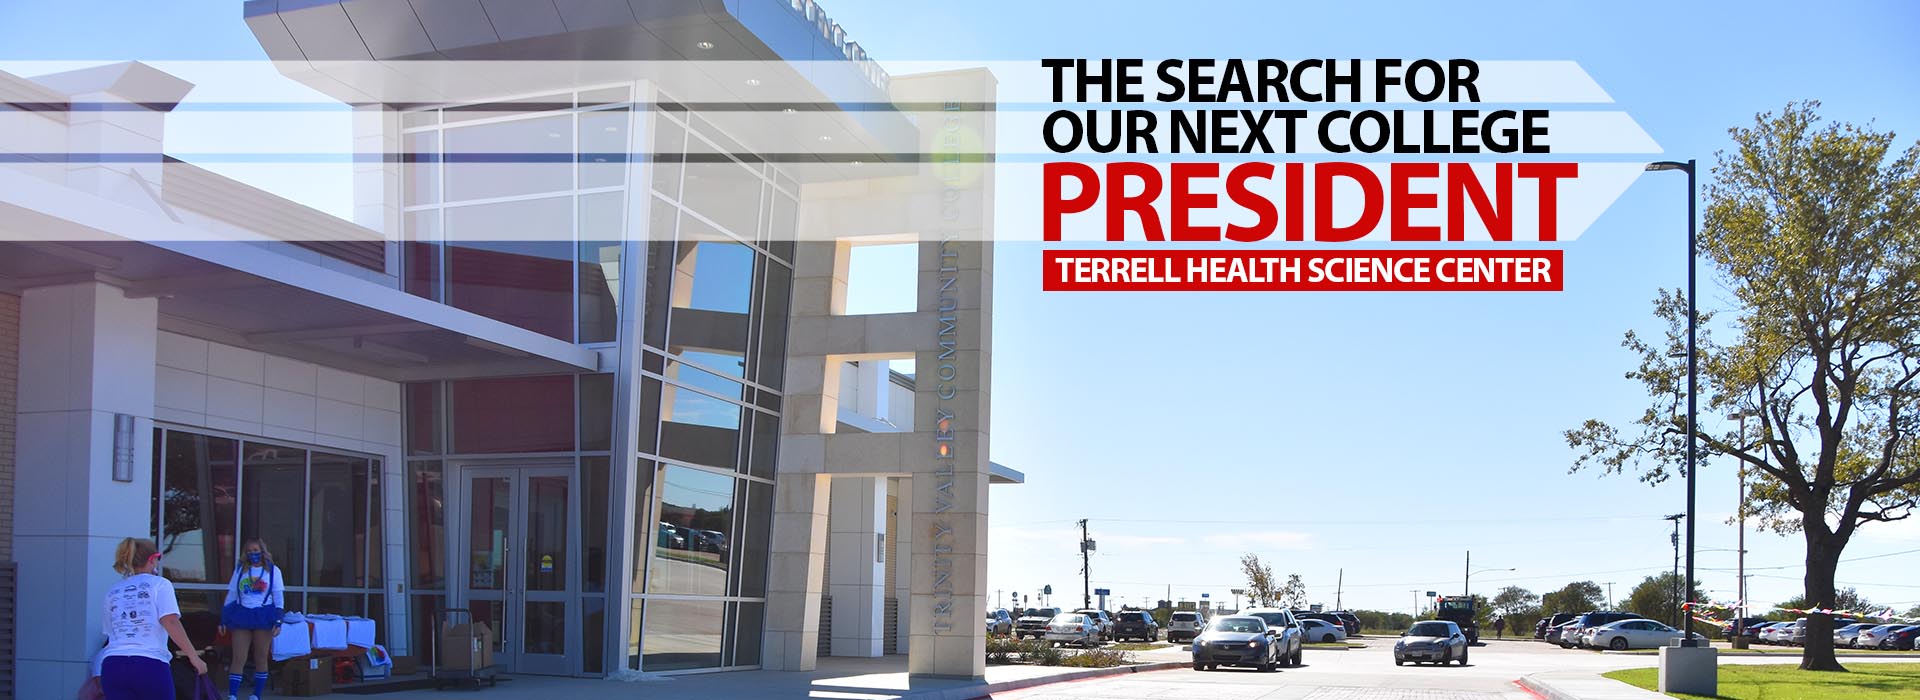 The search for our next college President - Terrell Health Science Center